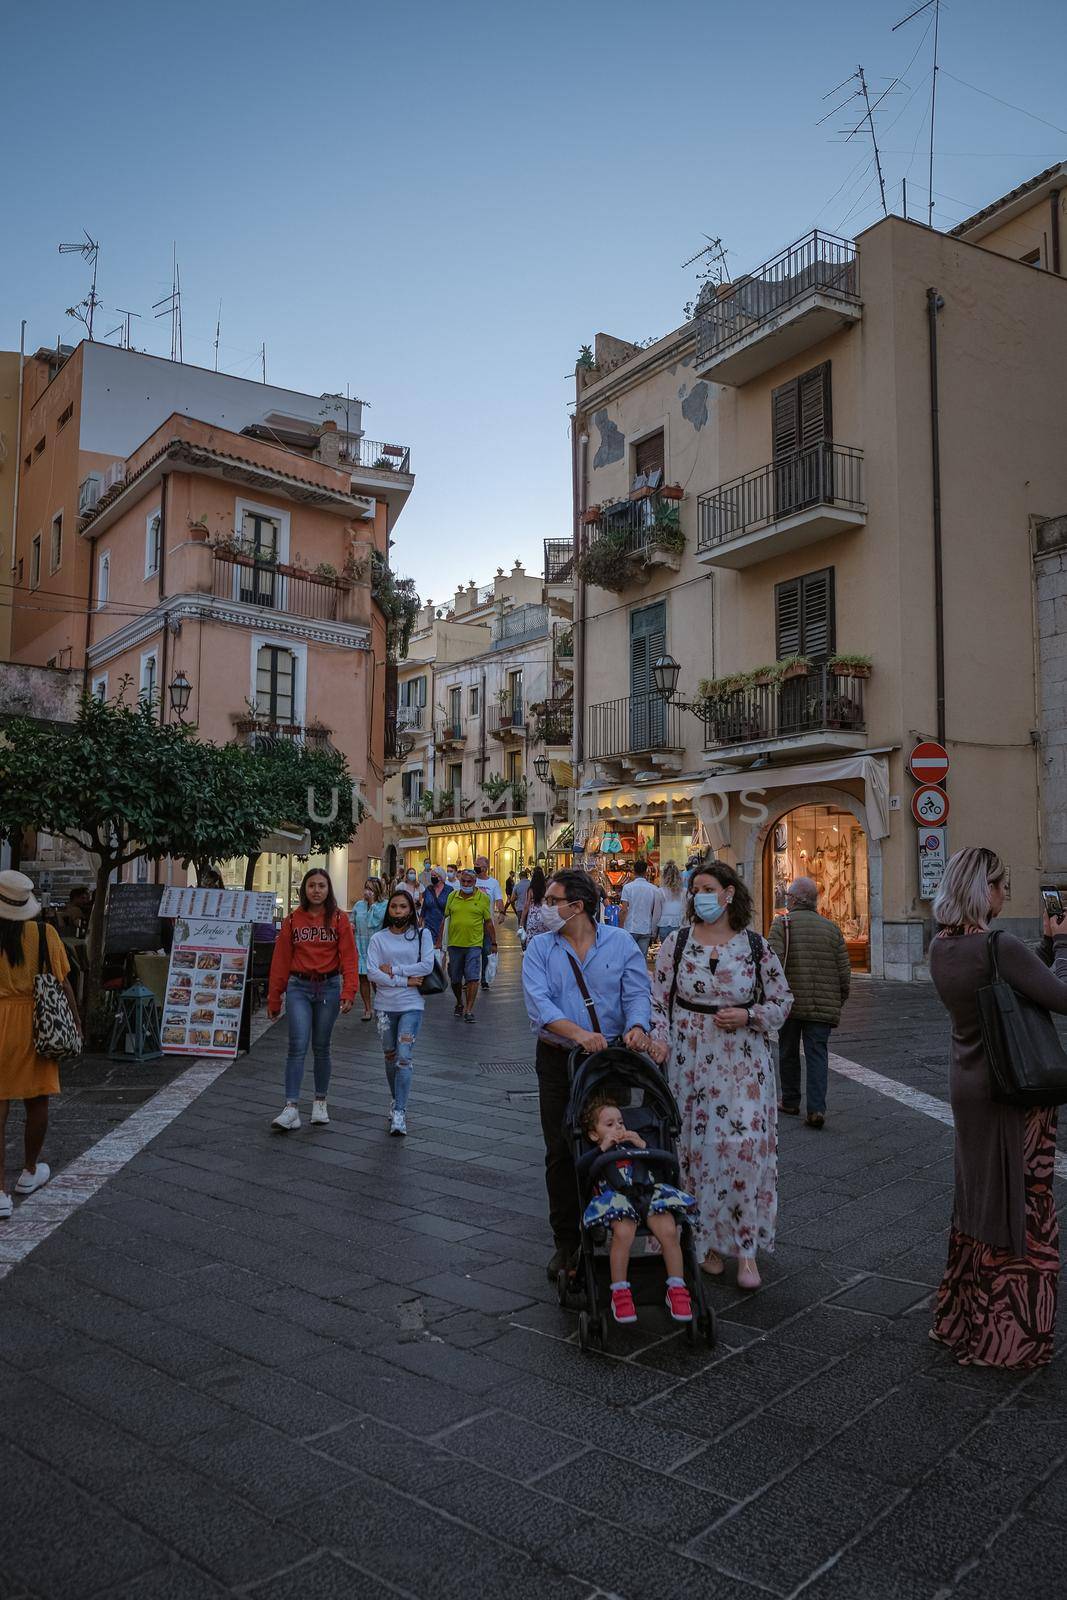 Taormina Sicily Italy October 2020, people on the streets using face mask during the pandemic Corona Covid 19 virus outbreak. 